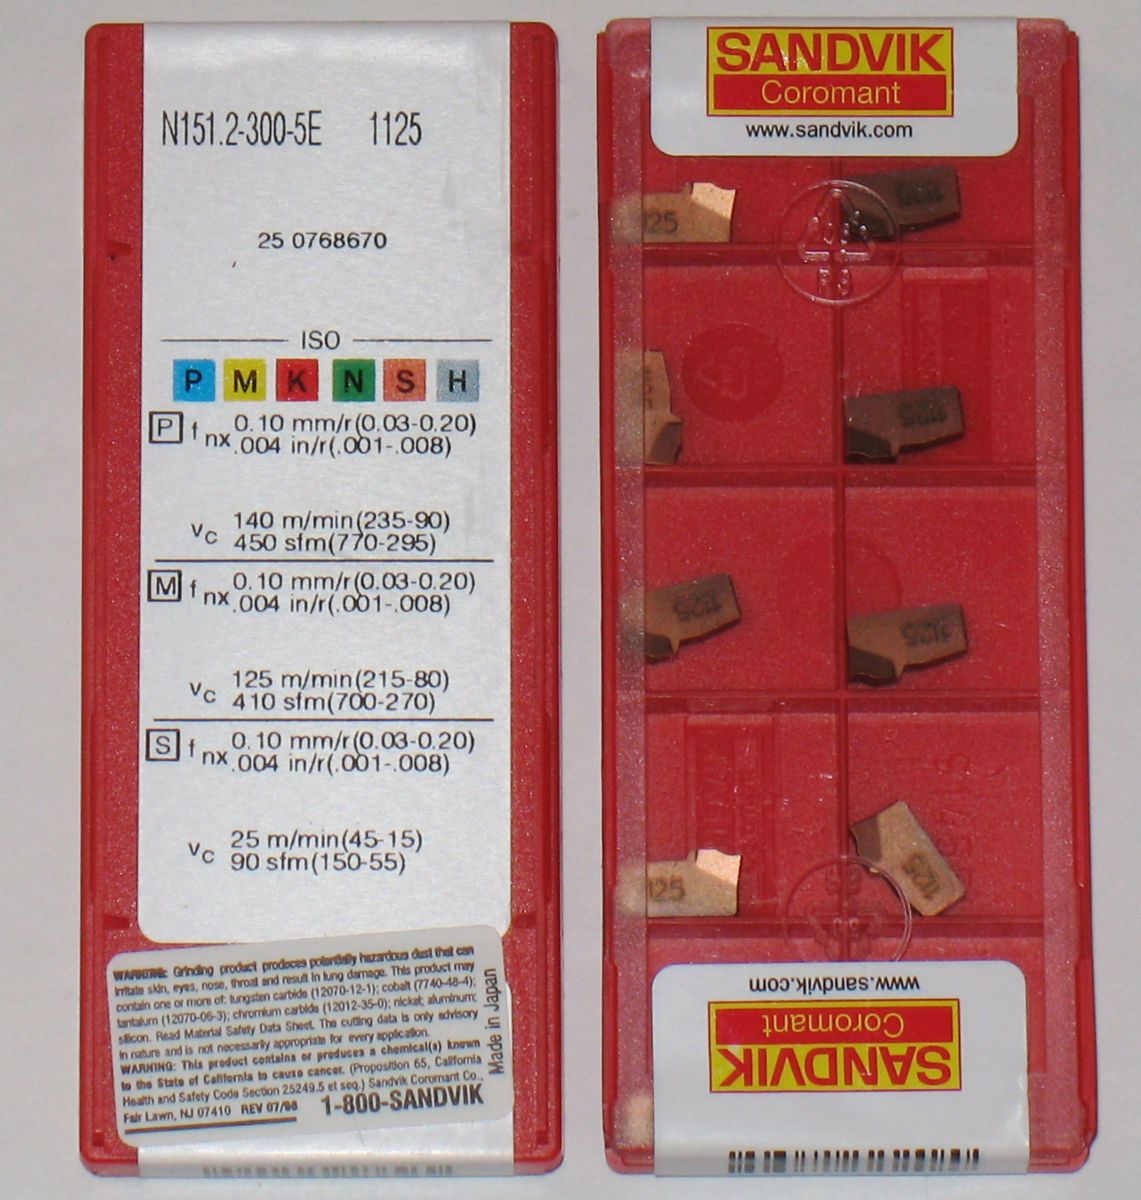 LOT of 20 SANDVIK Carbide Inserts N151 2 300 5E 1125 New In Boxes FREE 